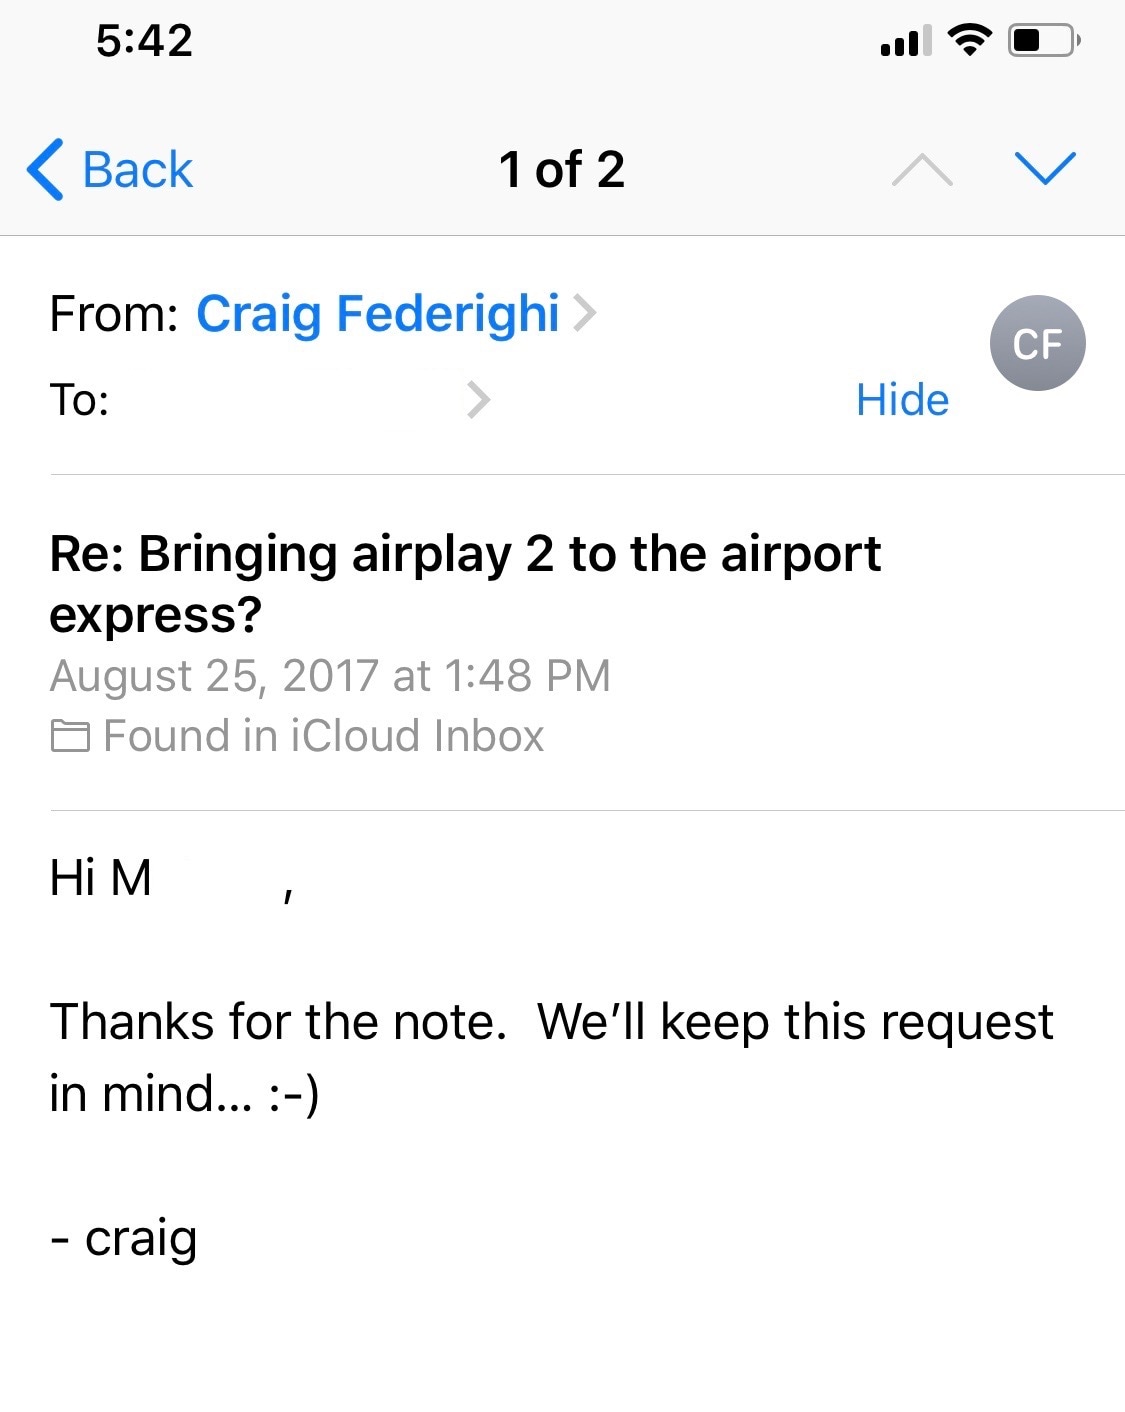 Craig on AirPort Express